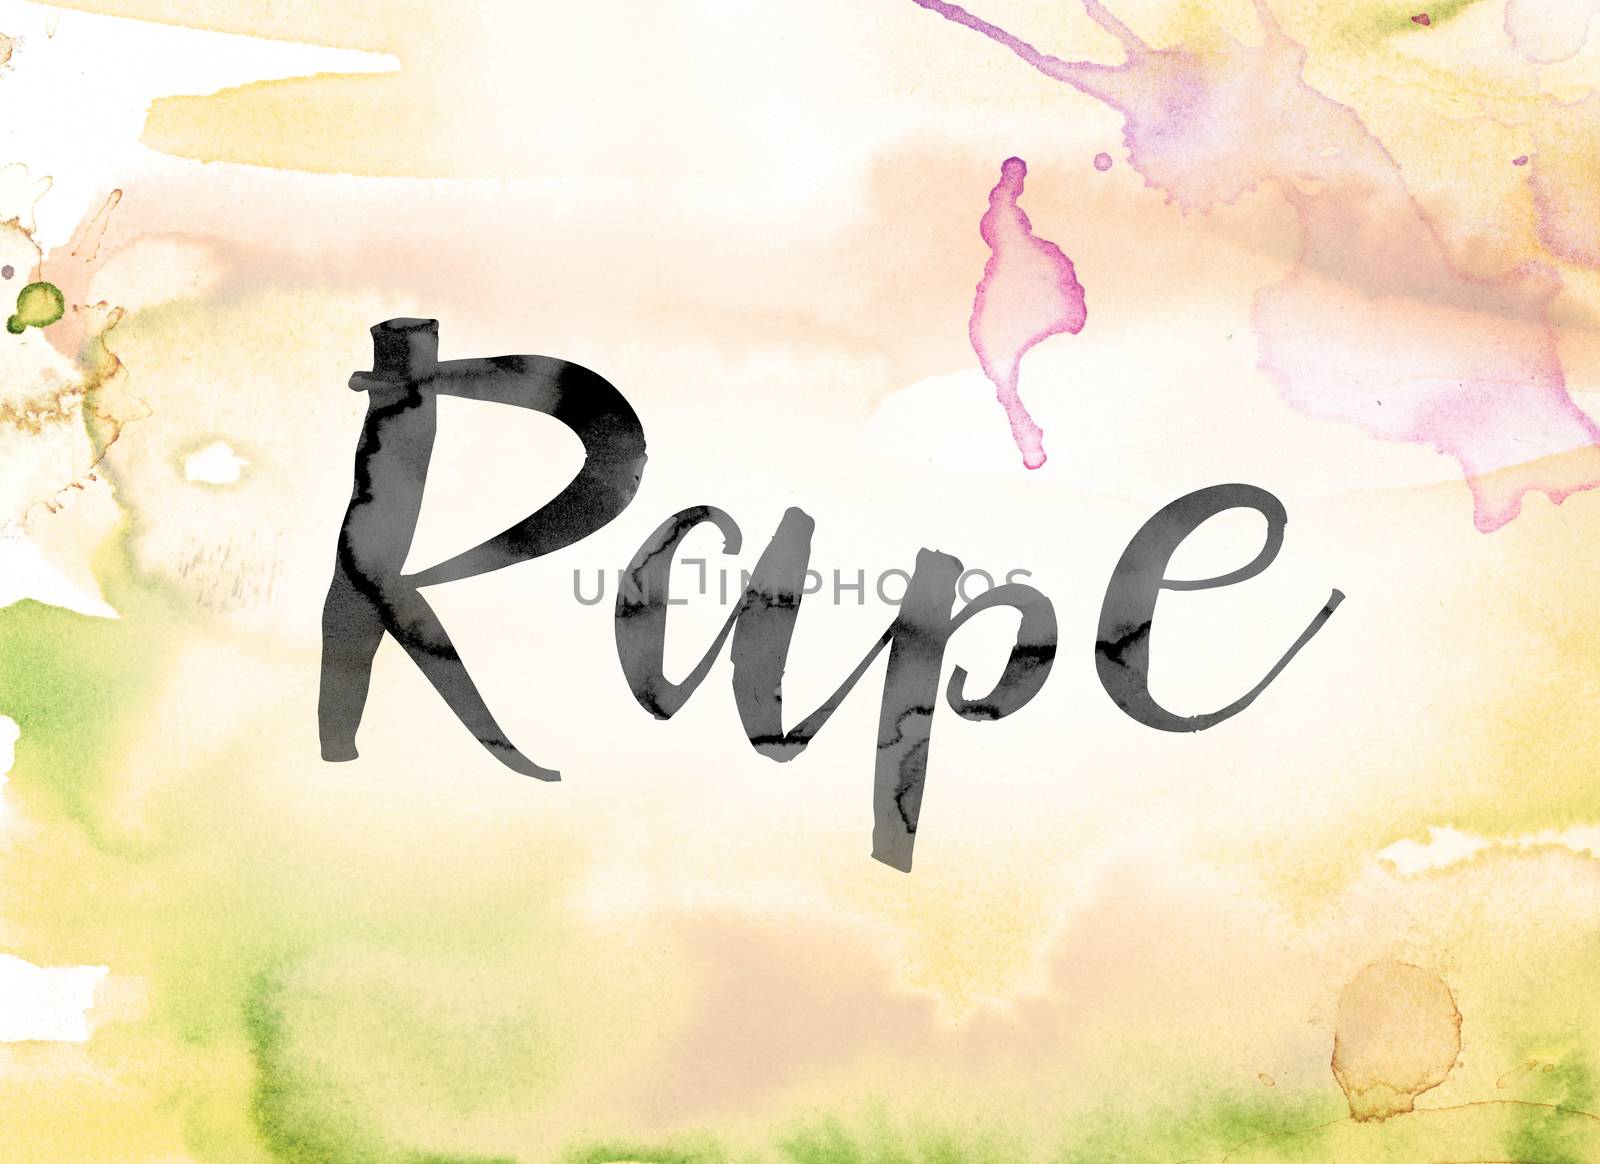 The word "Rape" painted in black ink over a colorful watercolor washed background concept and theme.